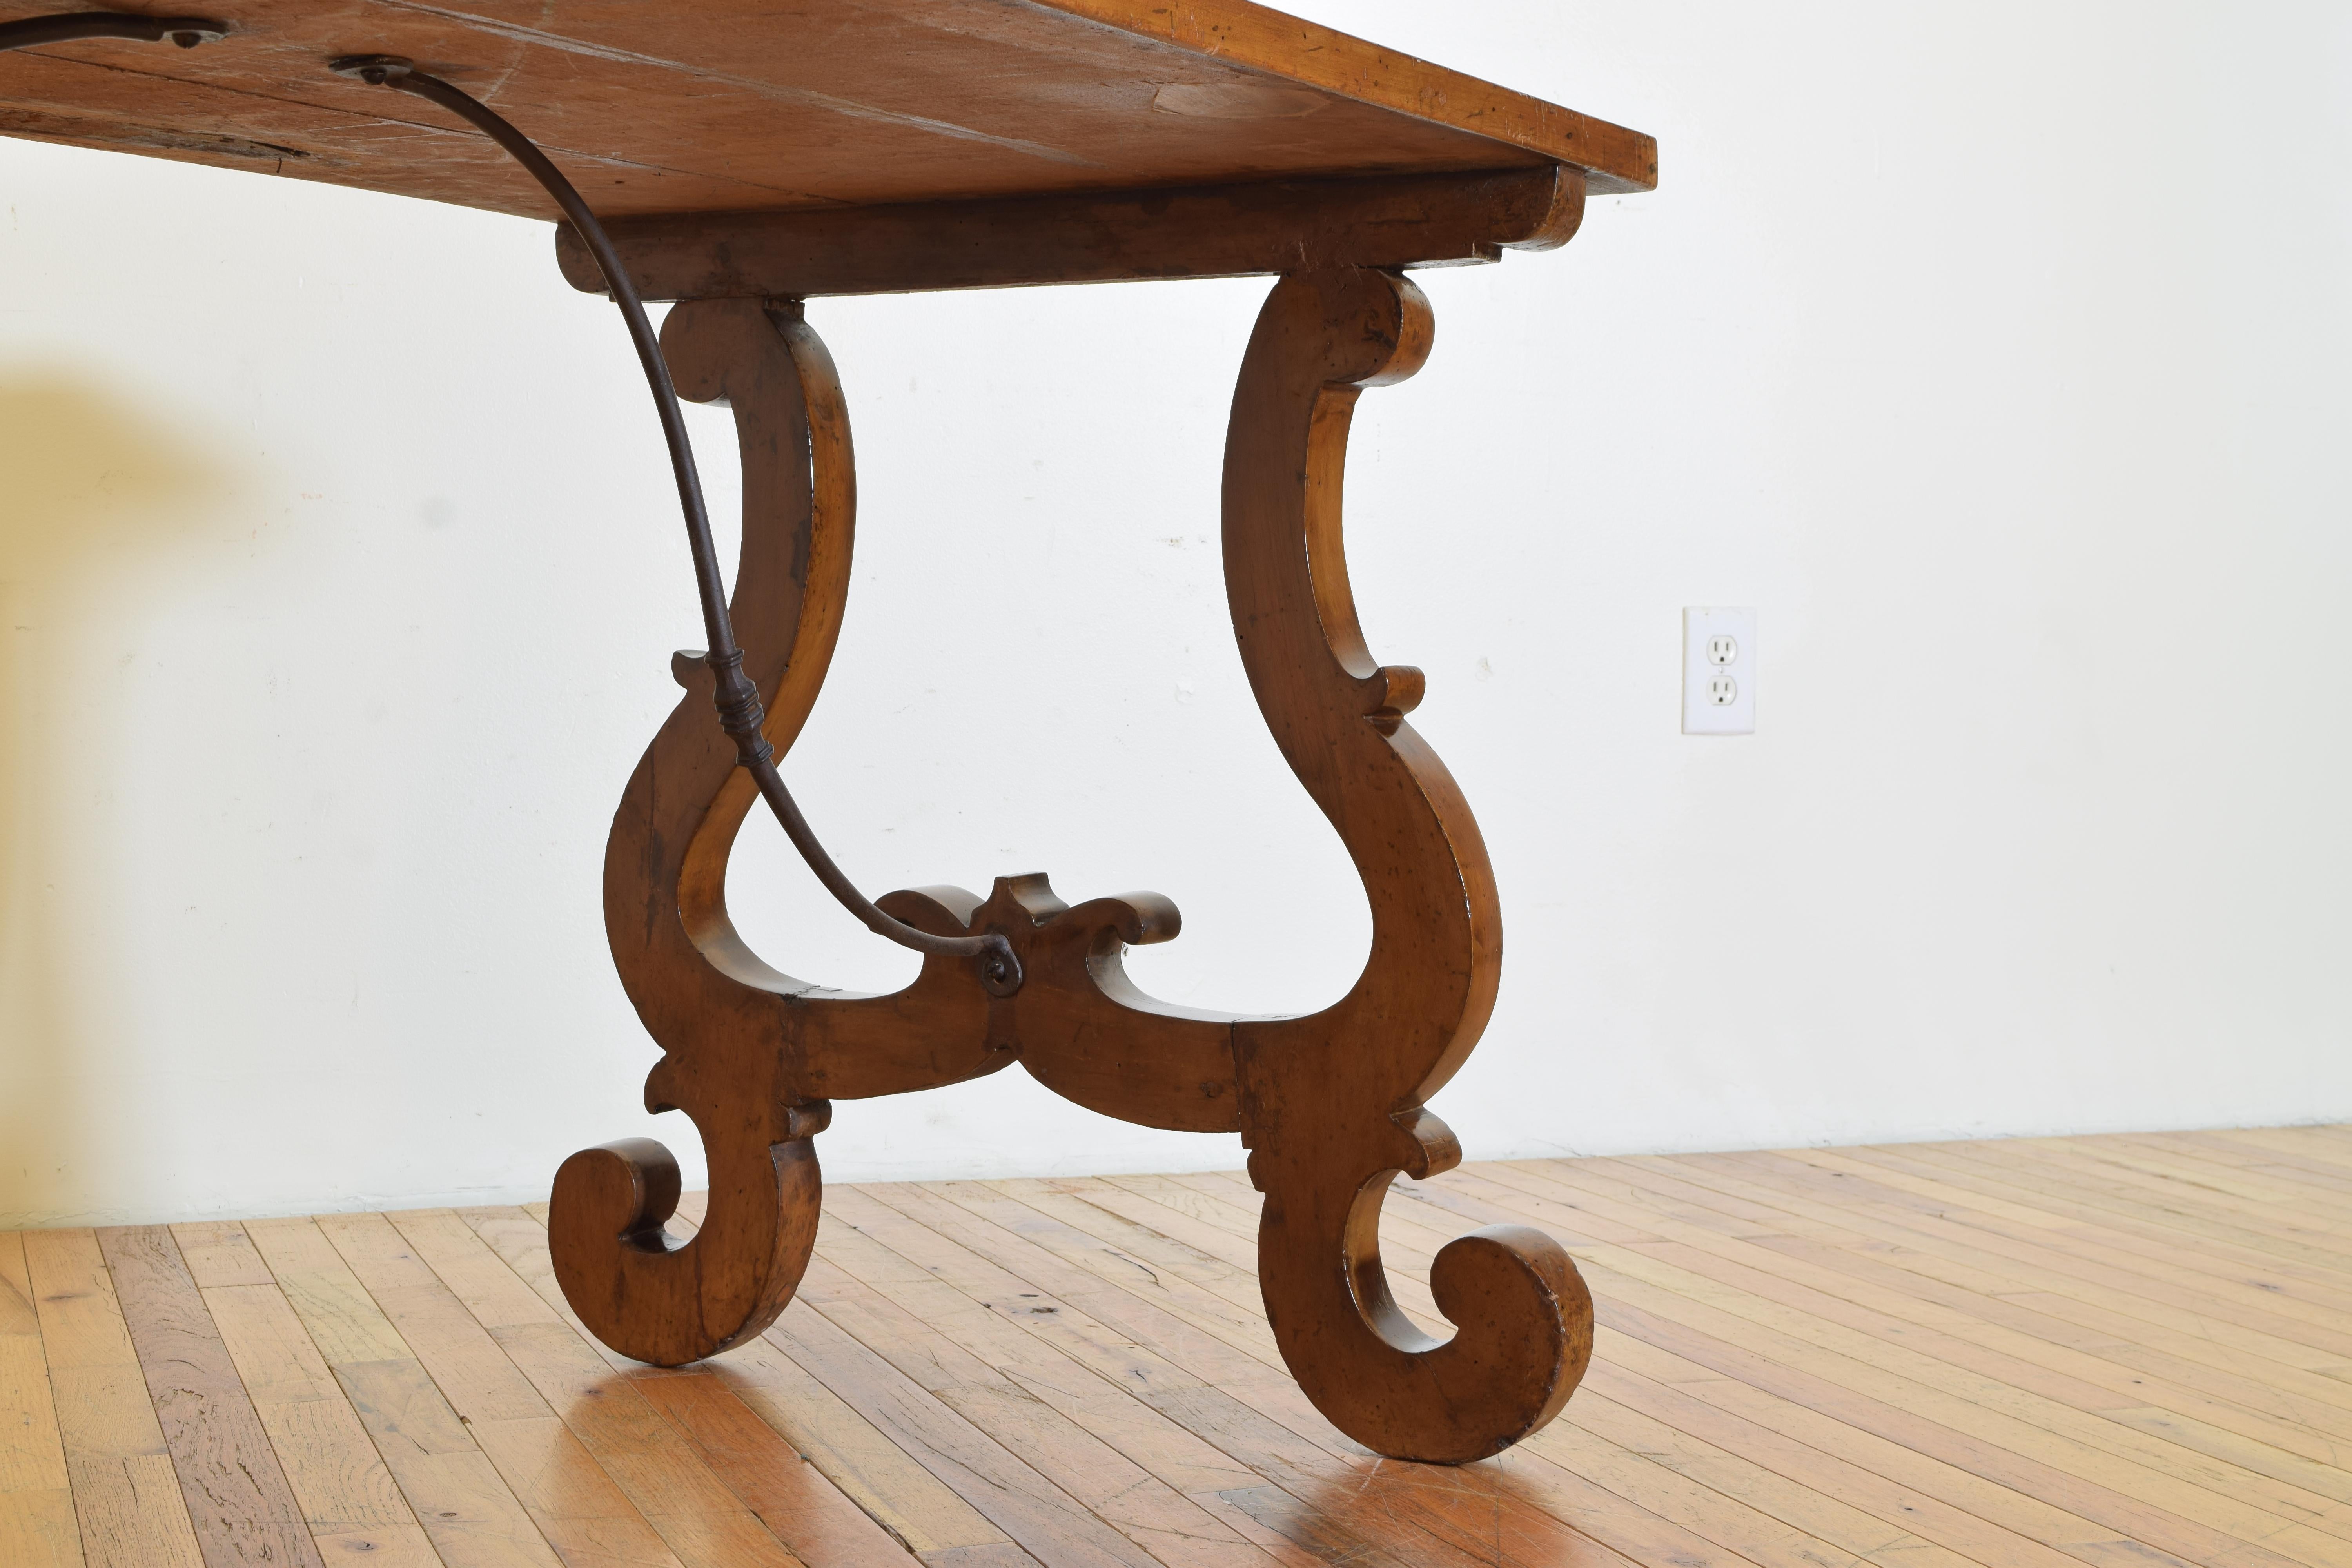 Italian, Toscana, Pearwood & Iron Center or Dining Table, 17th/18th Century For Sale 3